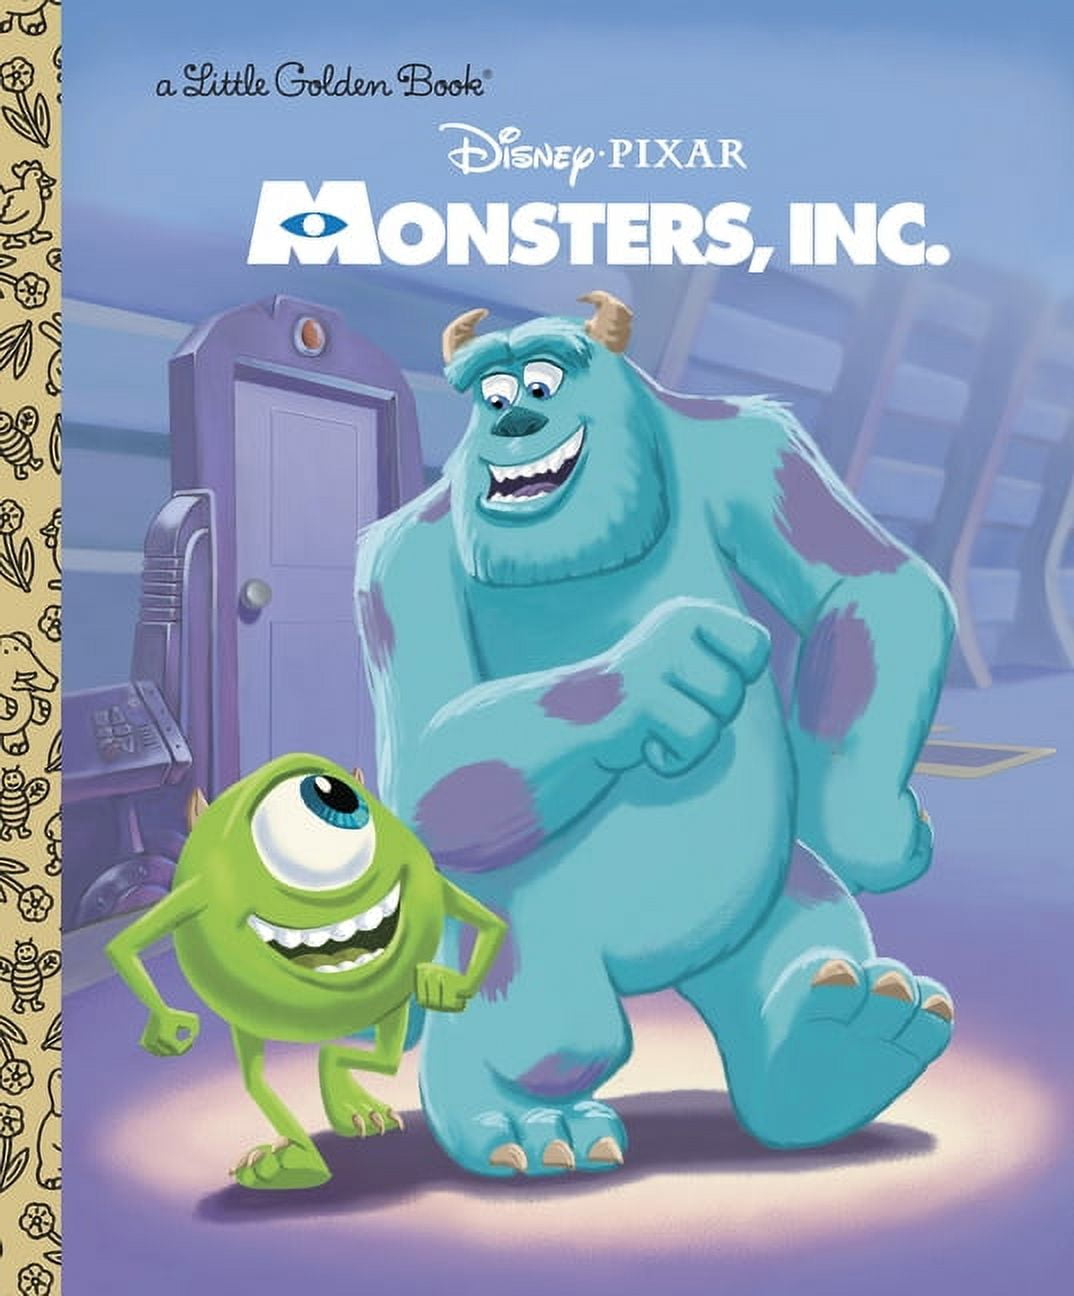 Disney Valentines Day Cards 16 Monsters University With 16 Pencils New